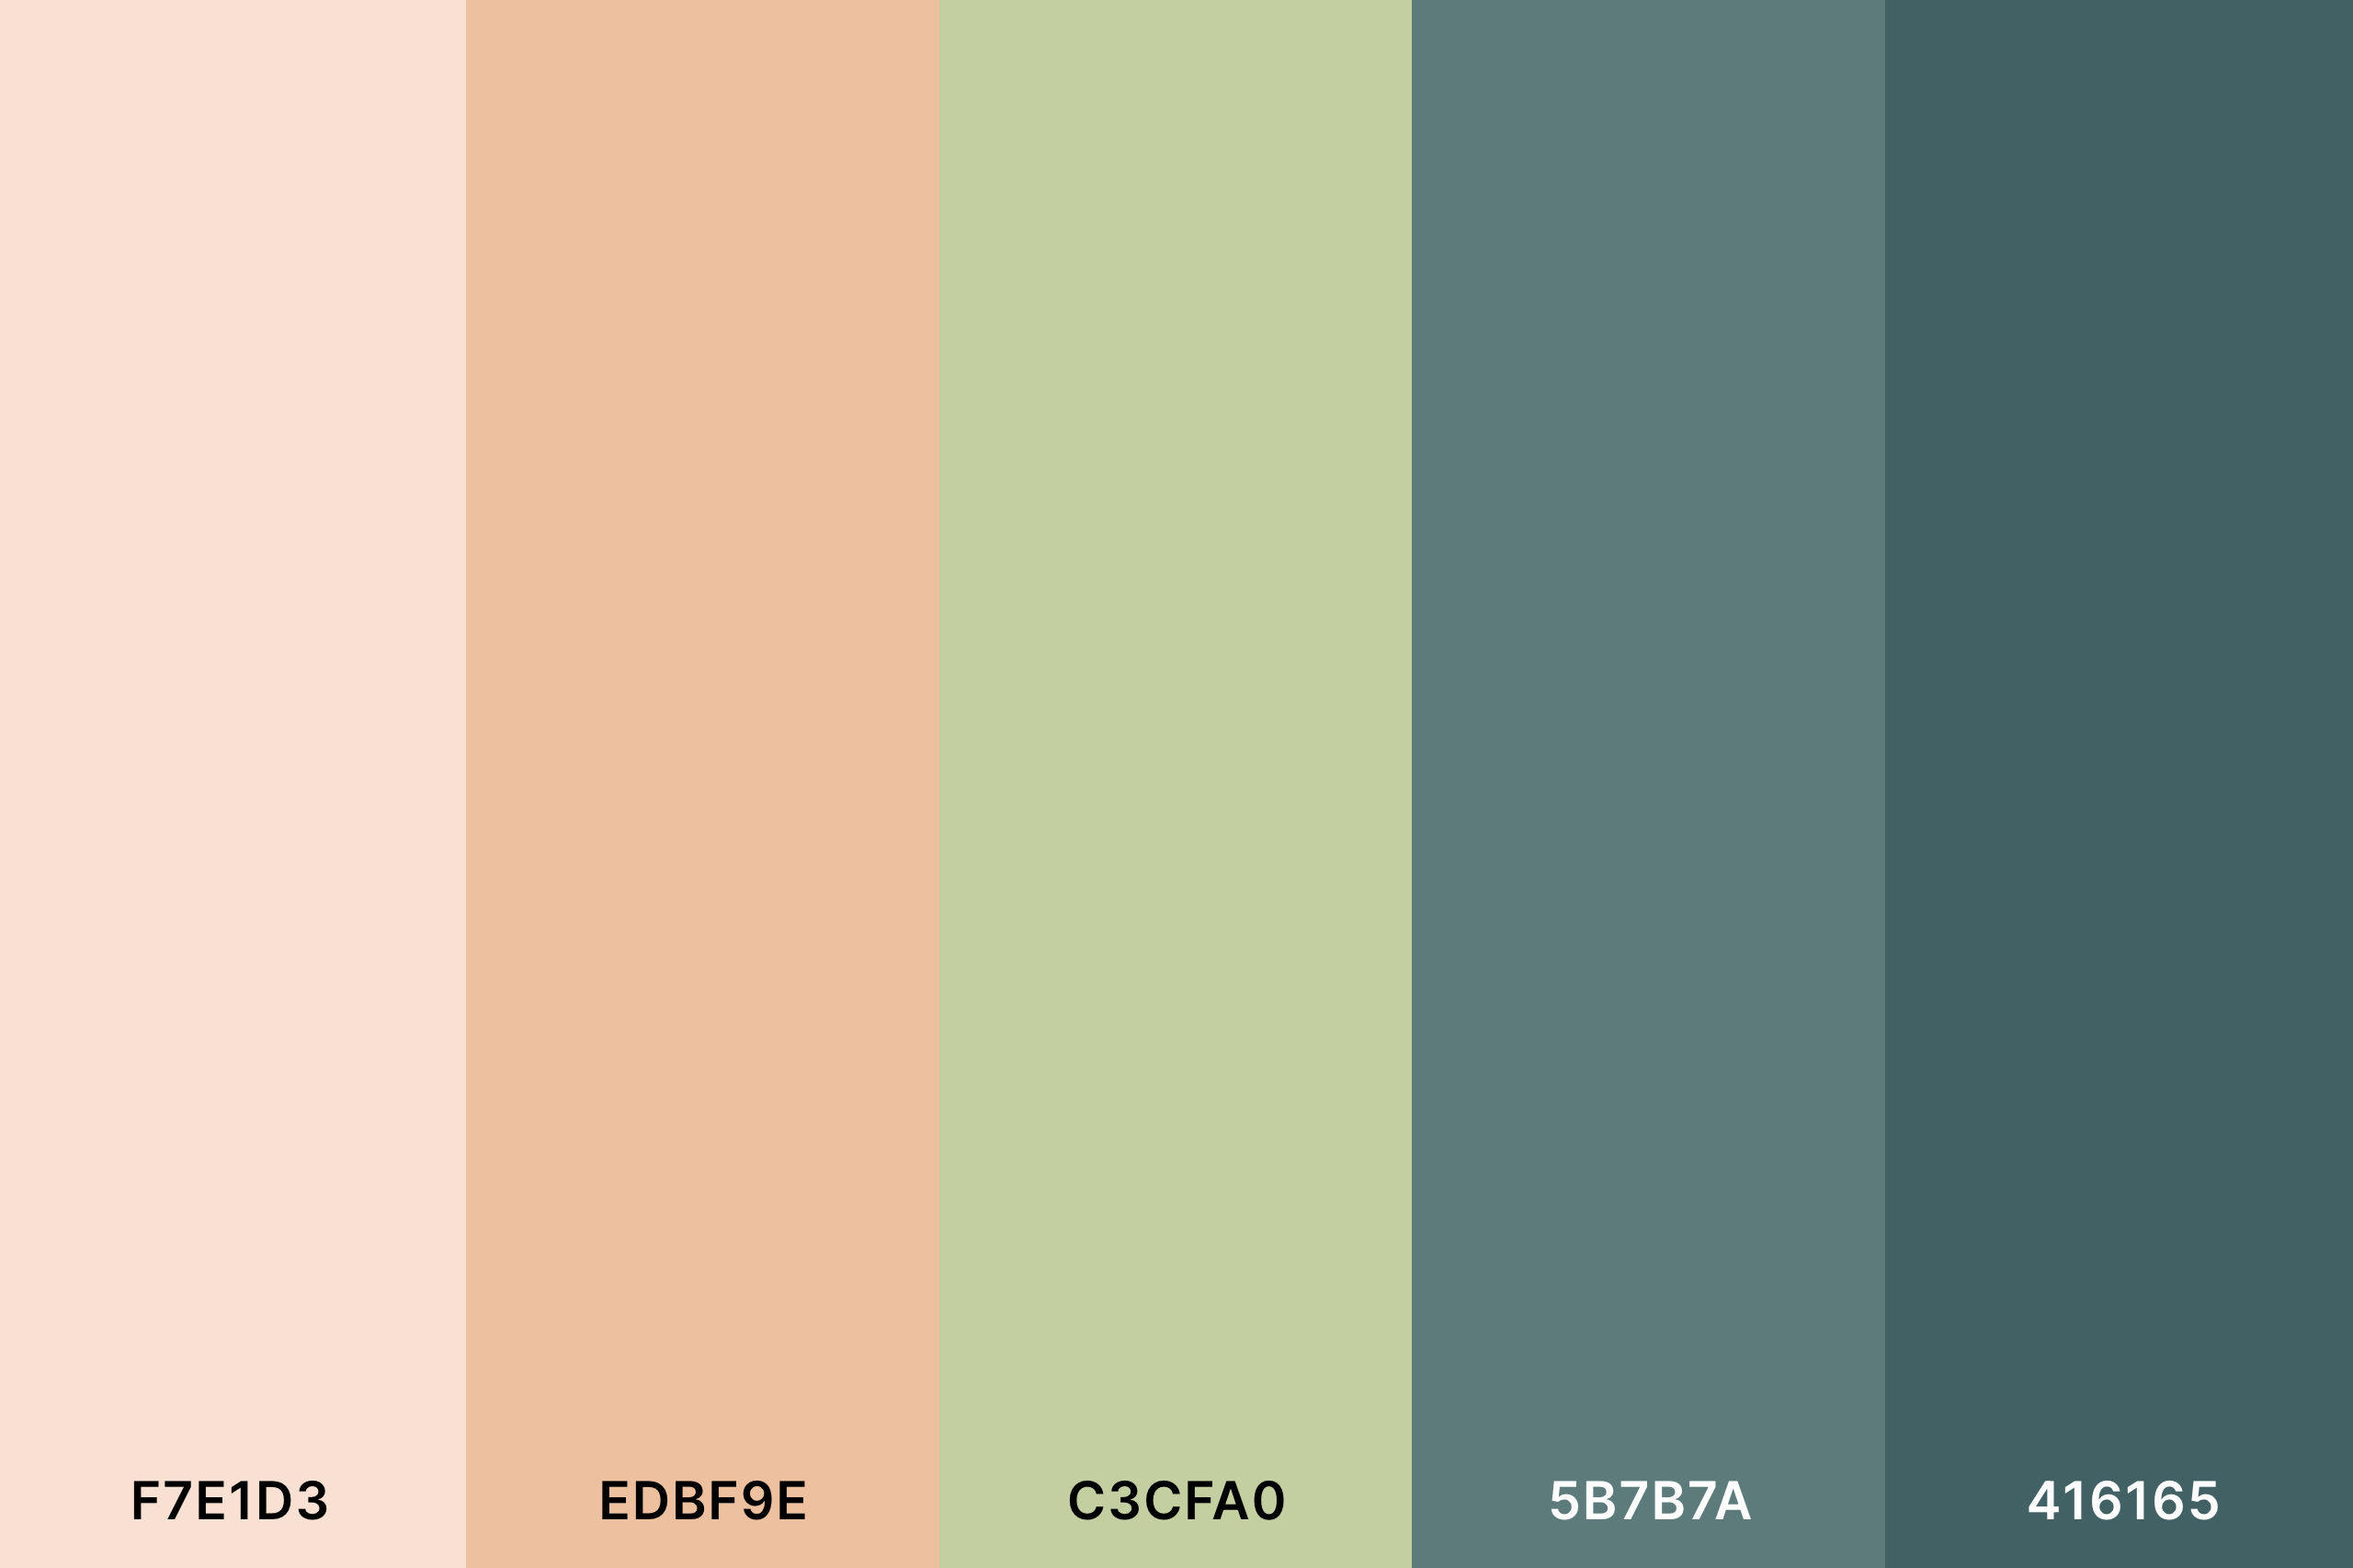 Peach and Sage Color Palette with Champagne Pink (Hex #F7E1D3) + Desert Sand (Hex #EDBF9E) + Sage (Hex #C3CFA0) + Hooker'S Green (Hex #5B7B7A) + Dark Slate Gray (Hex #416165) Color Palette with Hex Codes